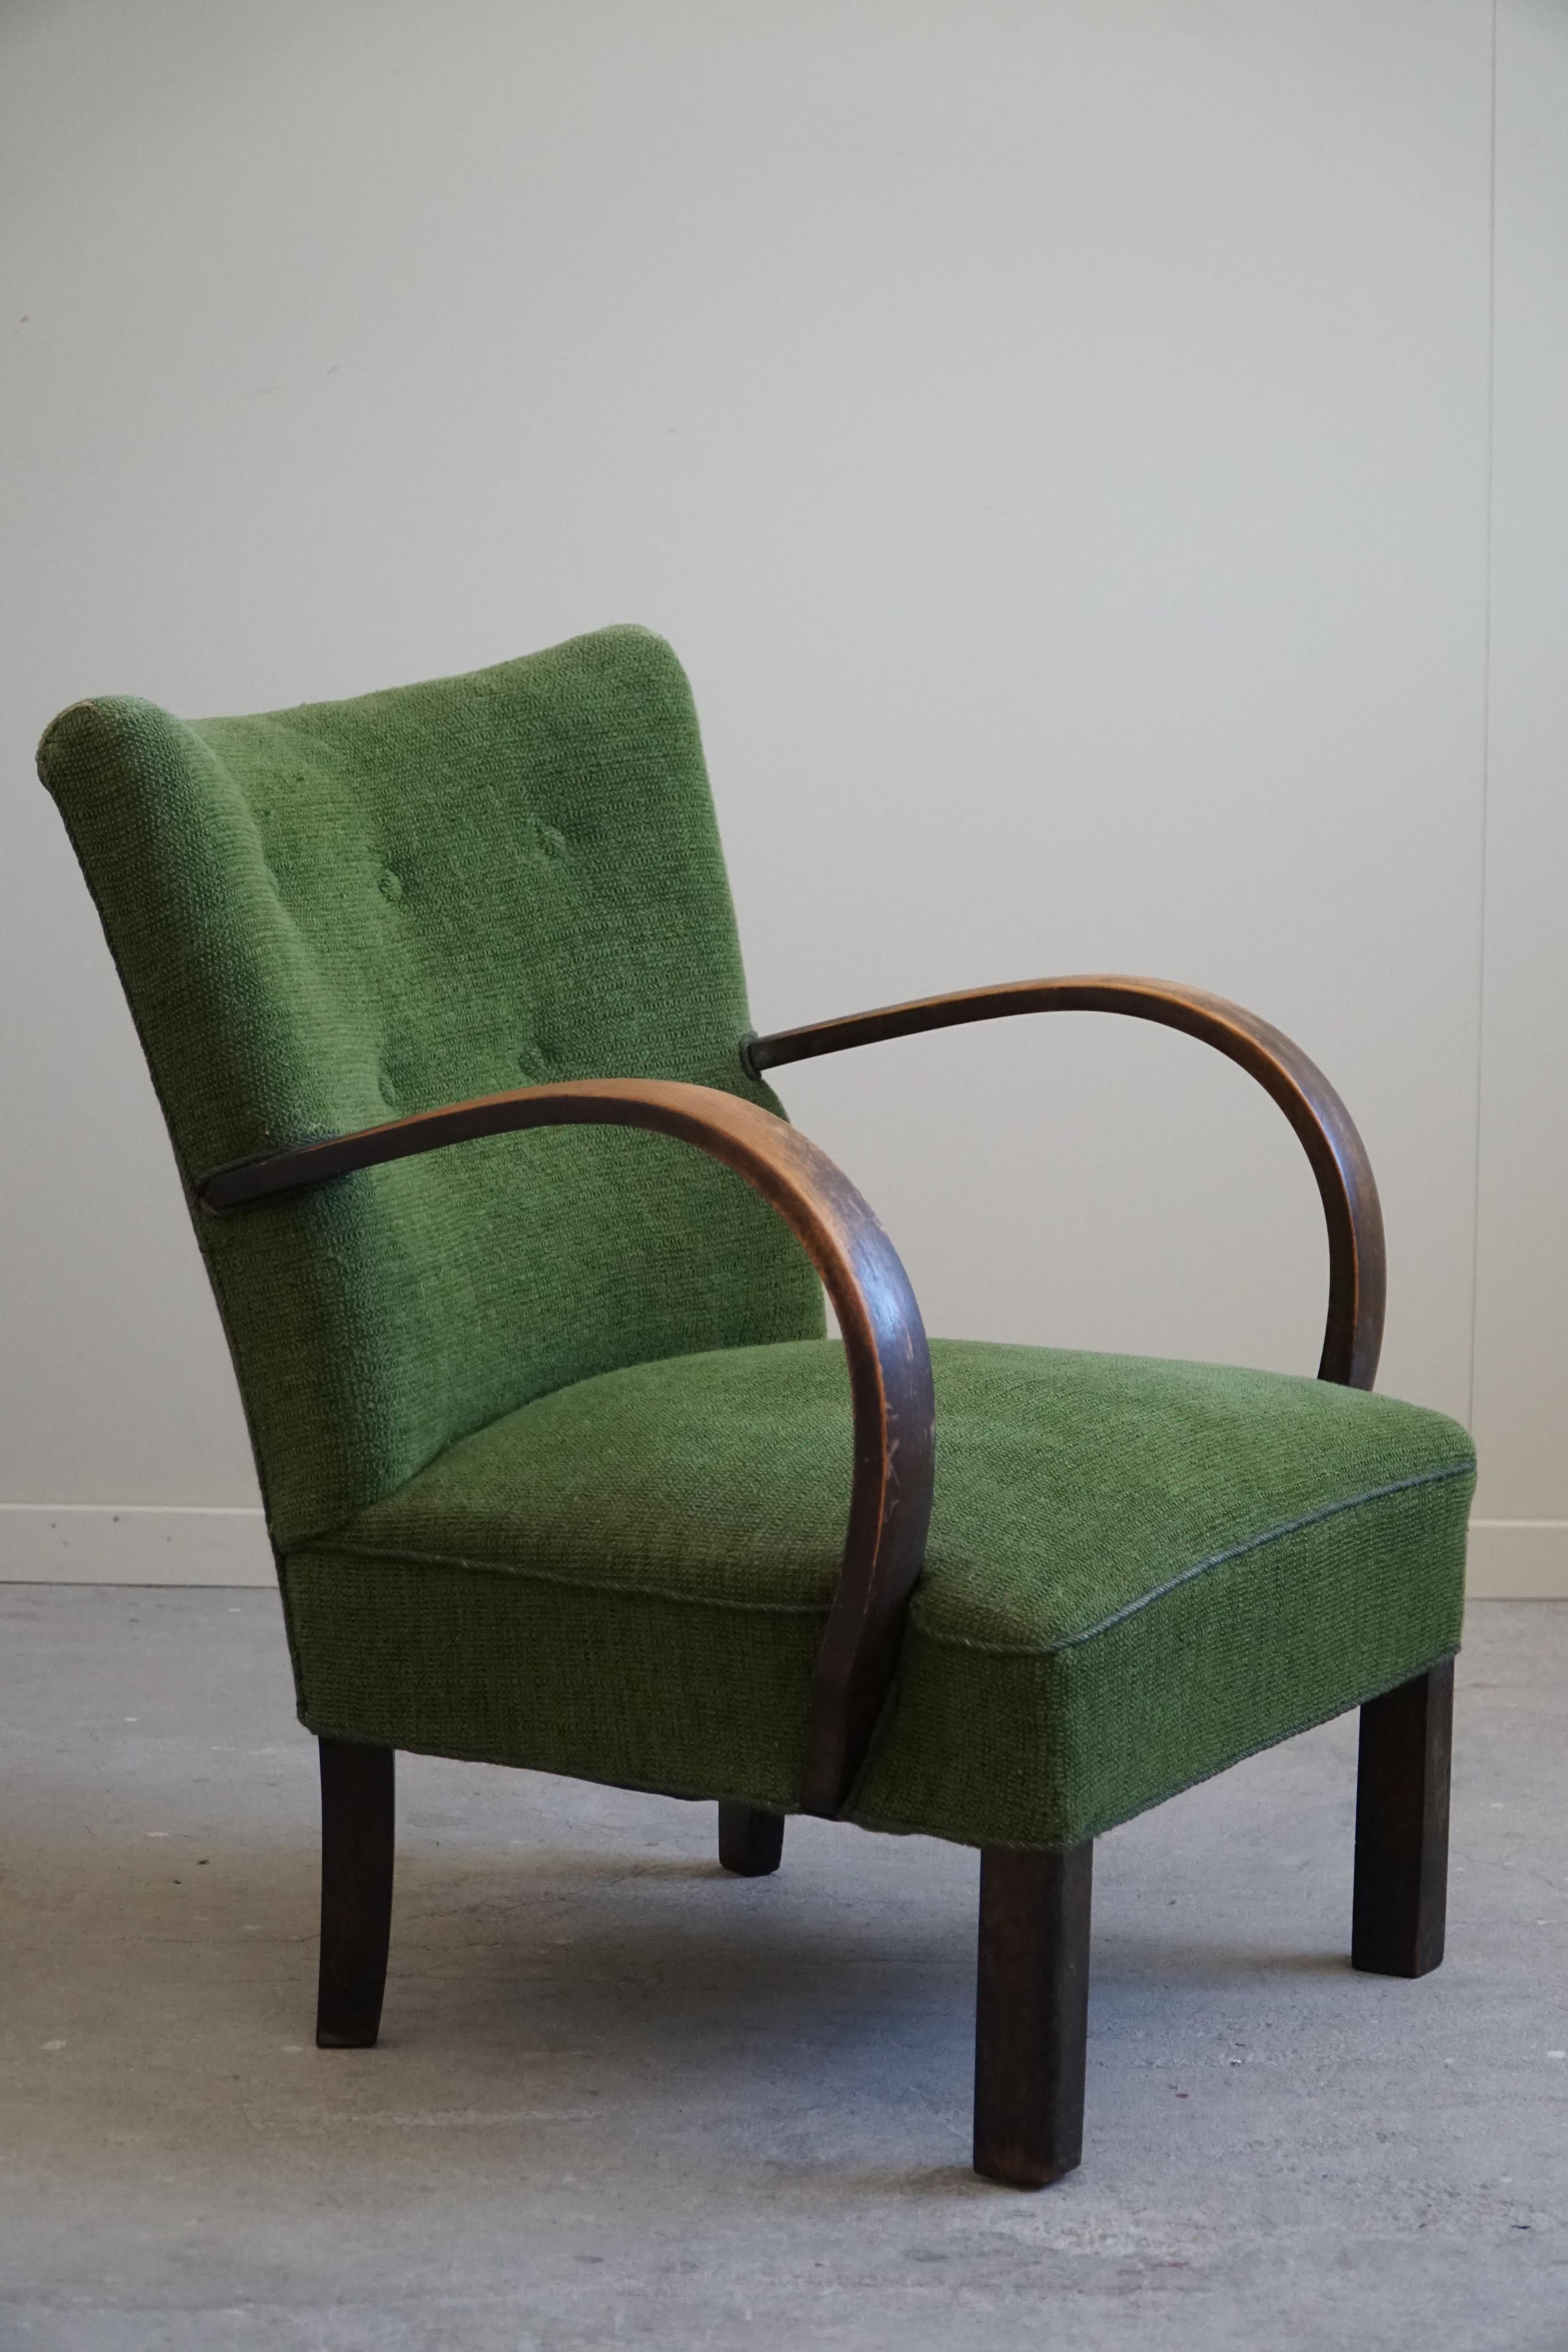 Mid Century Modern Easy Chair in Beech & Green Fabric, Danish Cabinetmaker, 1940 For Sale 6